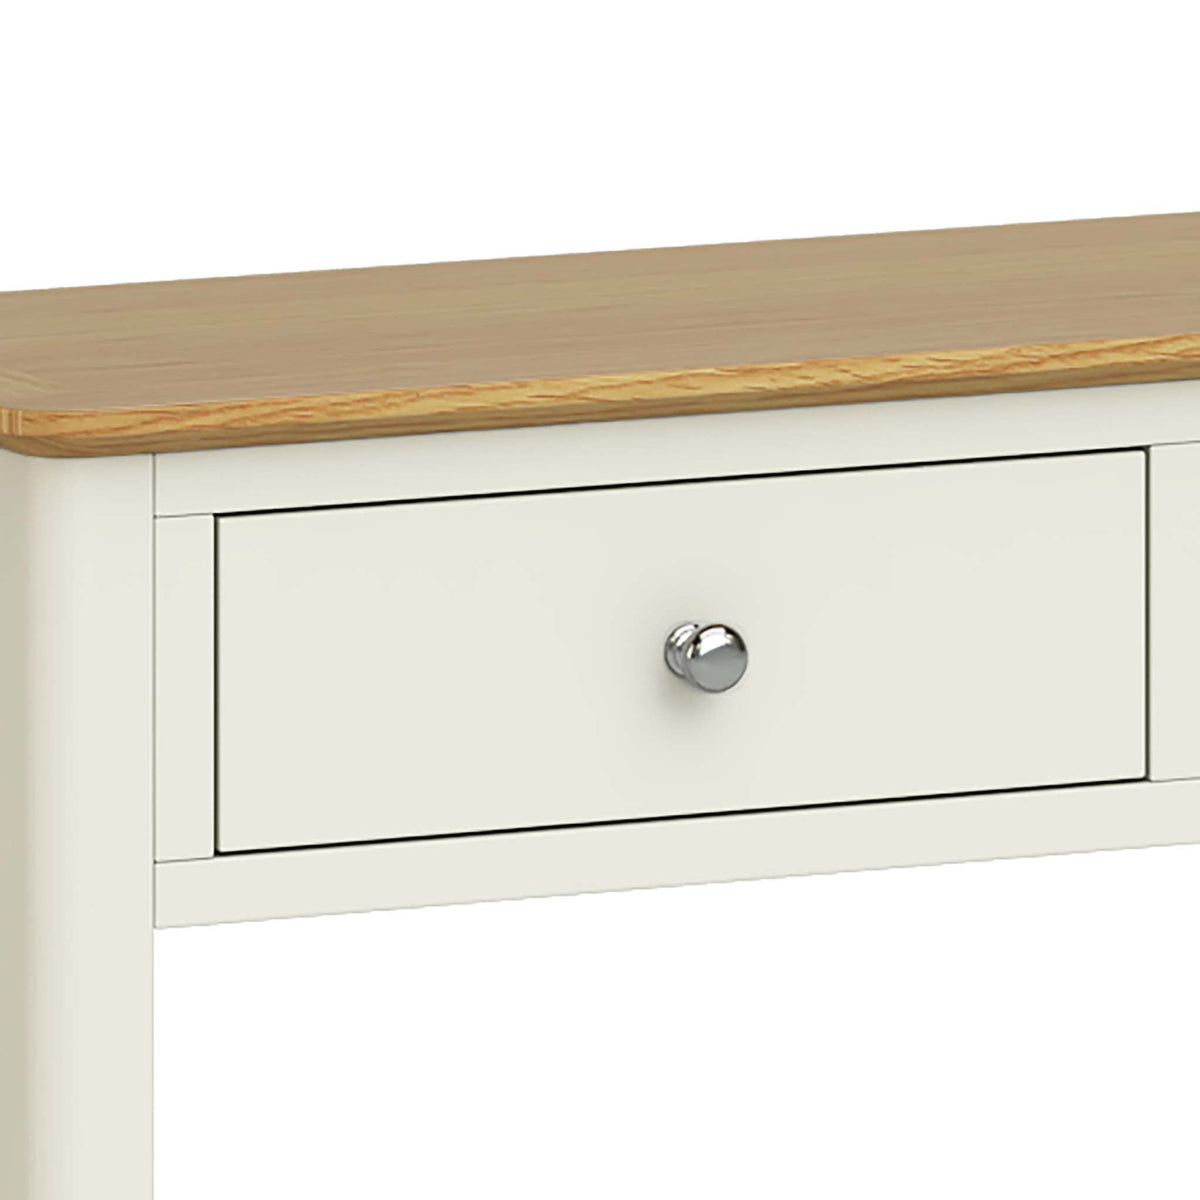 The Windsor Cream Painted Console Table with Storage Drawers - Close Up of Drawer